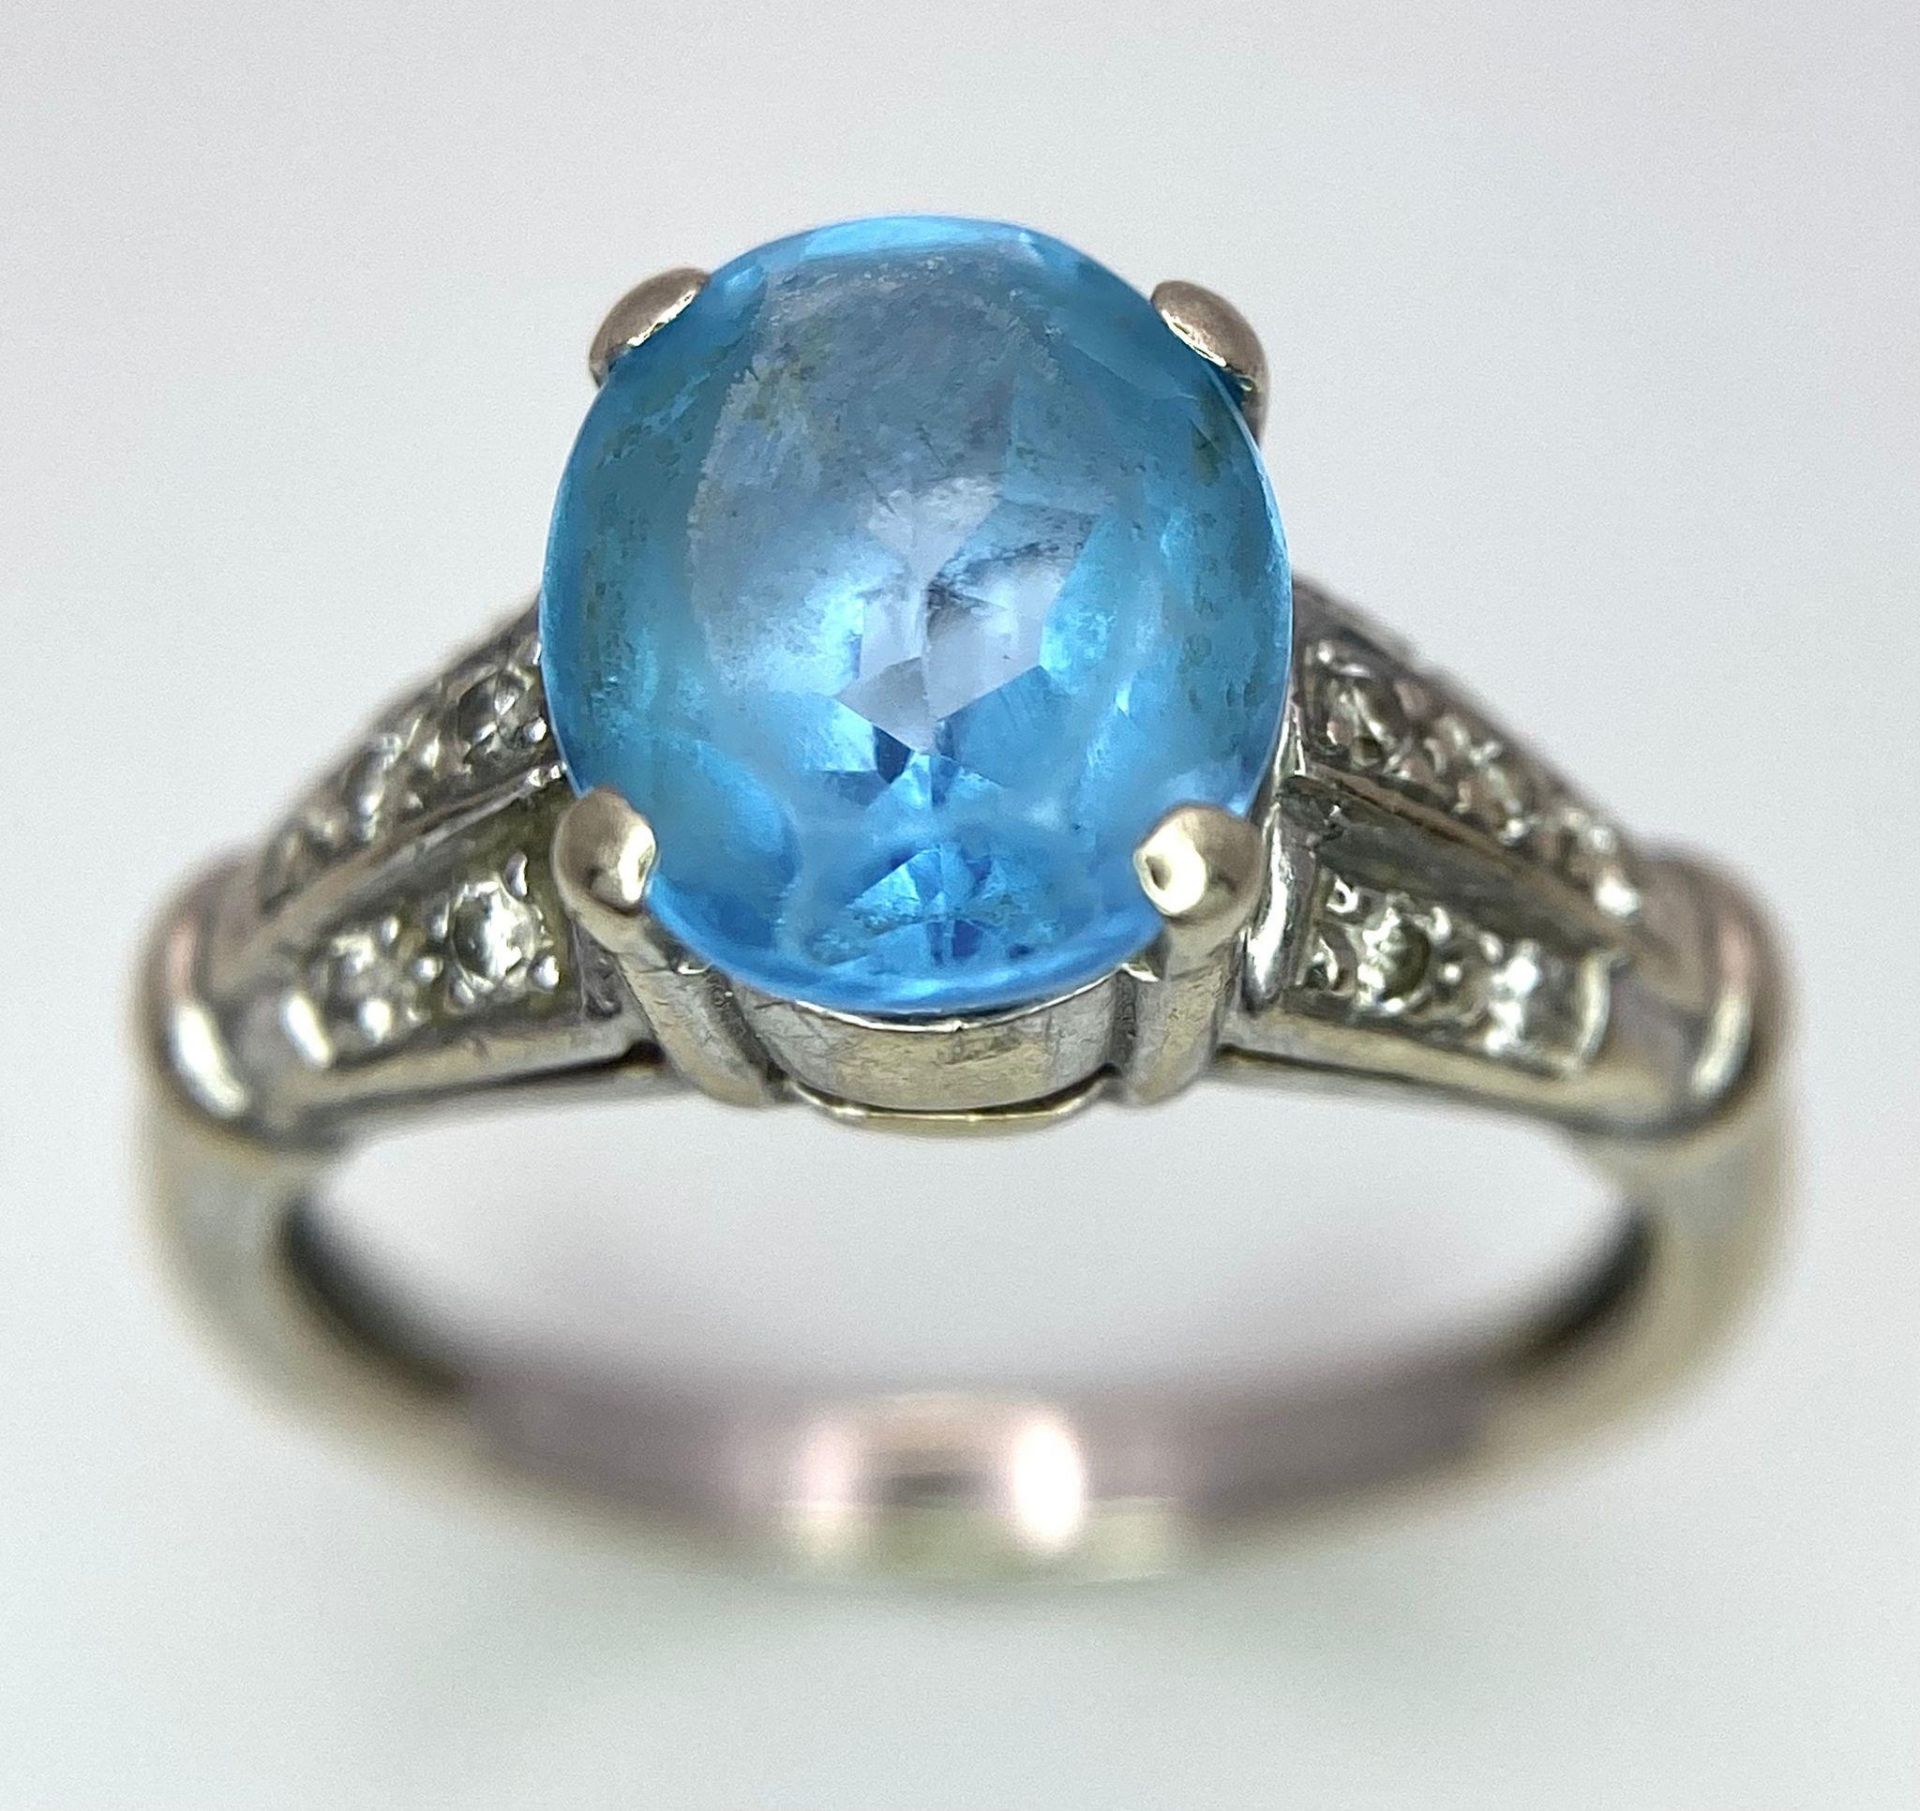 A vintage, 9 K white gold ring with a large, oval cut, vivid blue aquamarine and three bands of